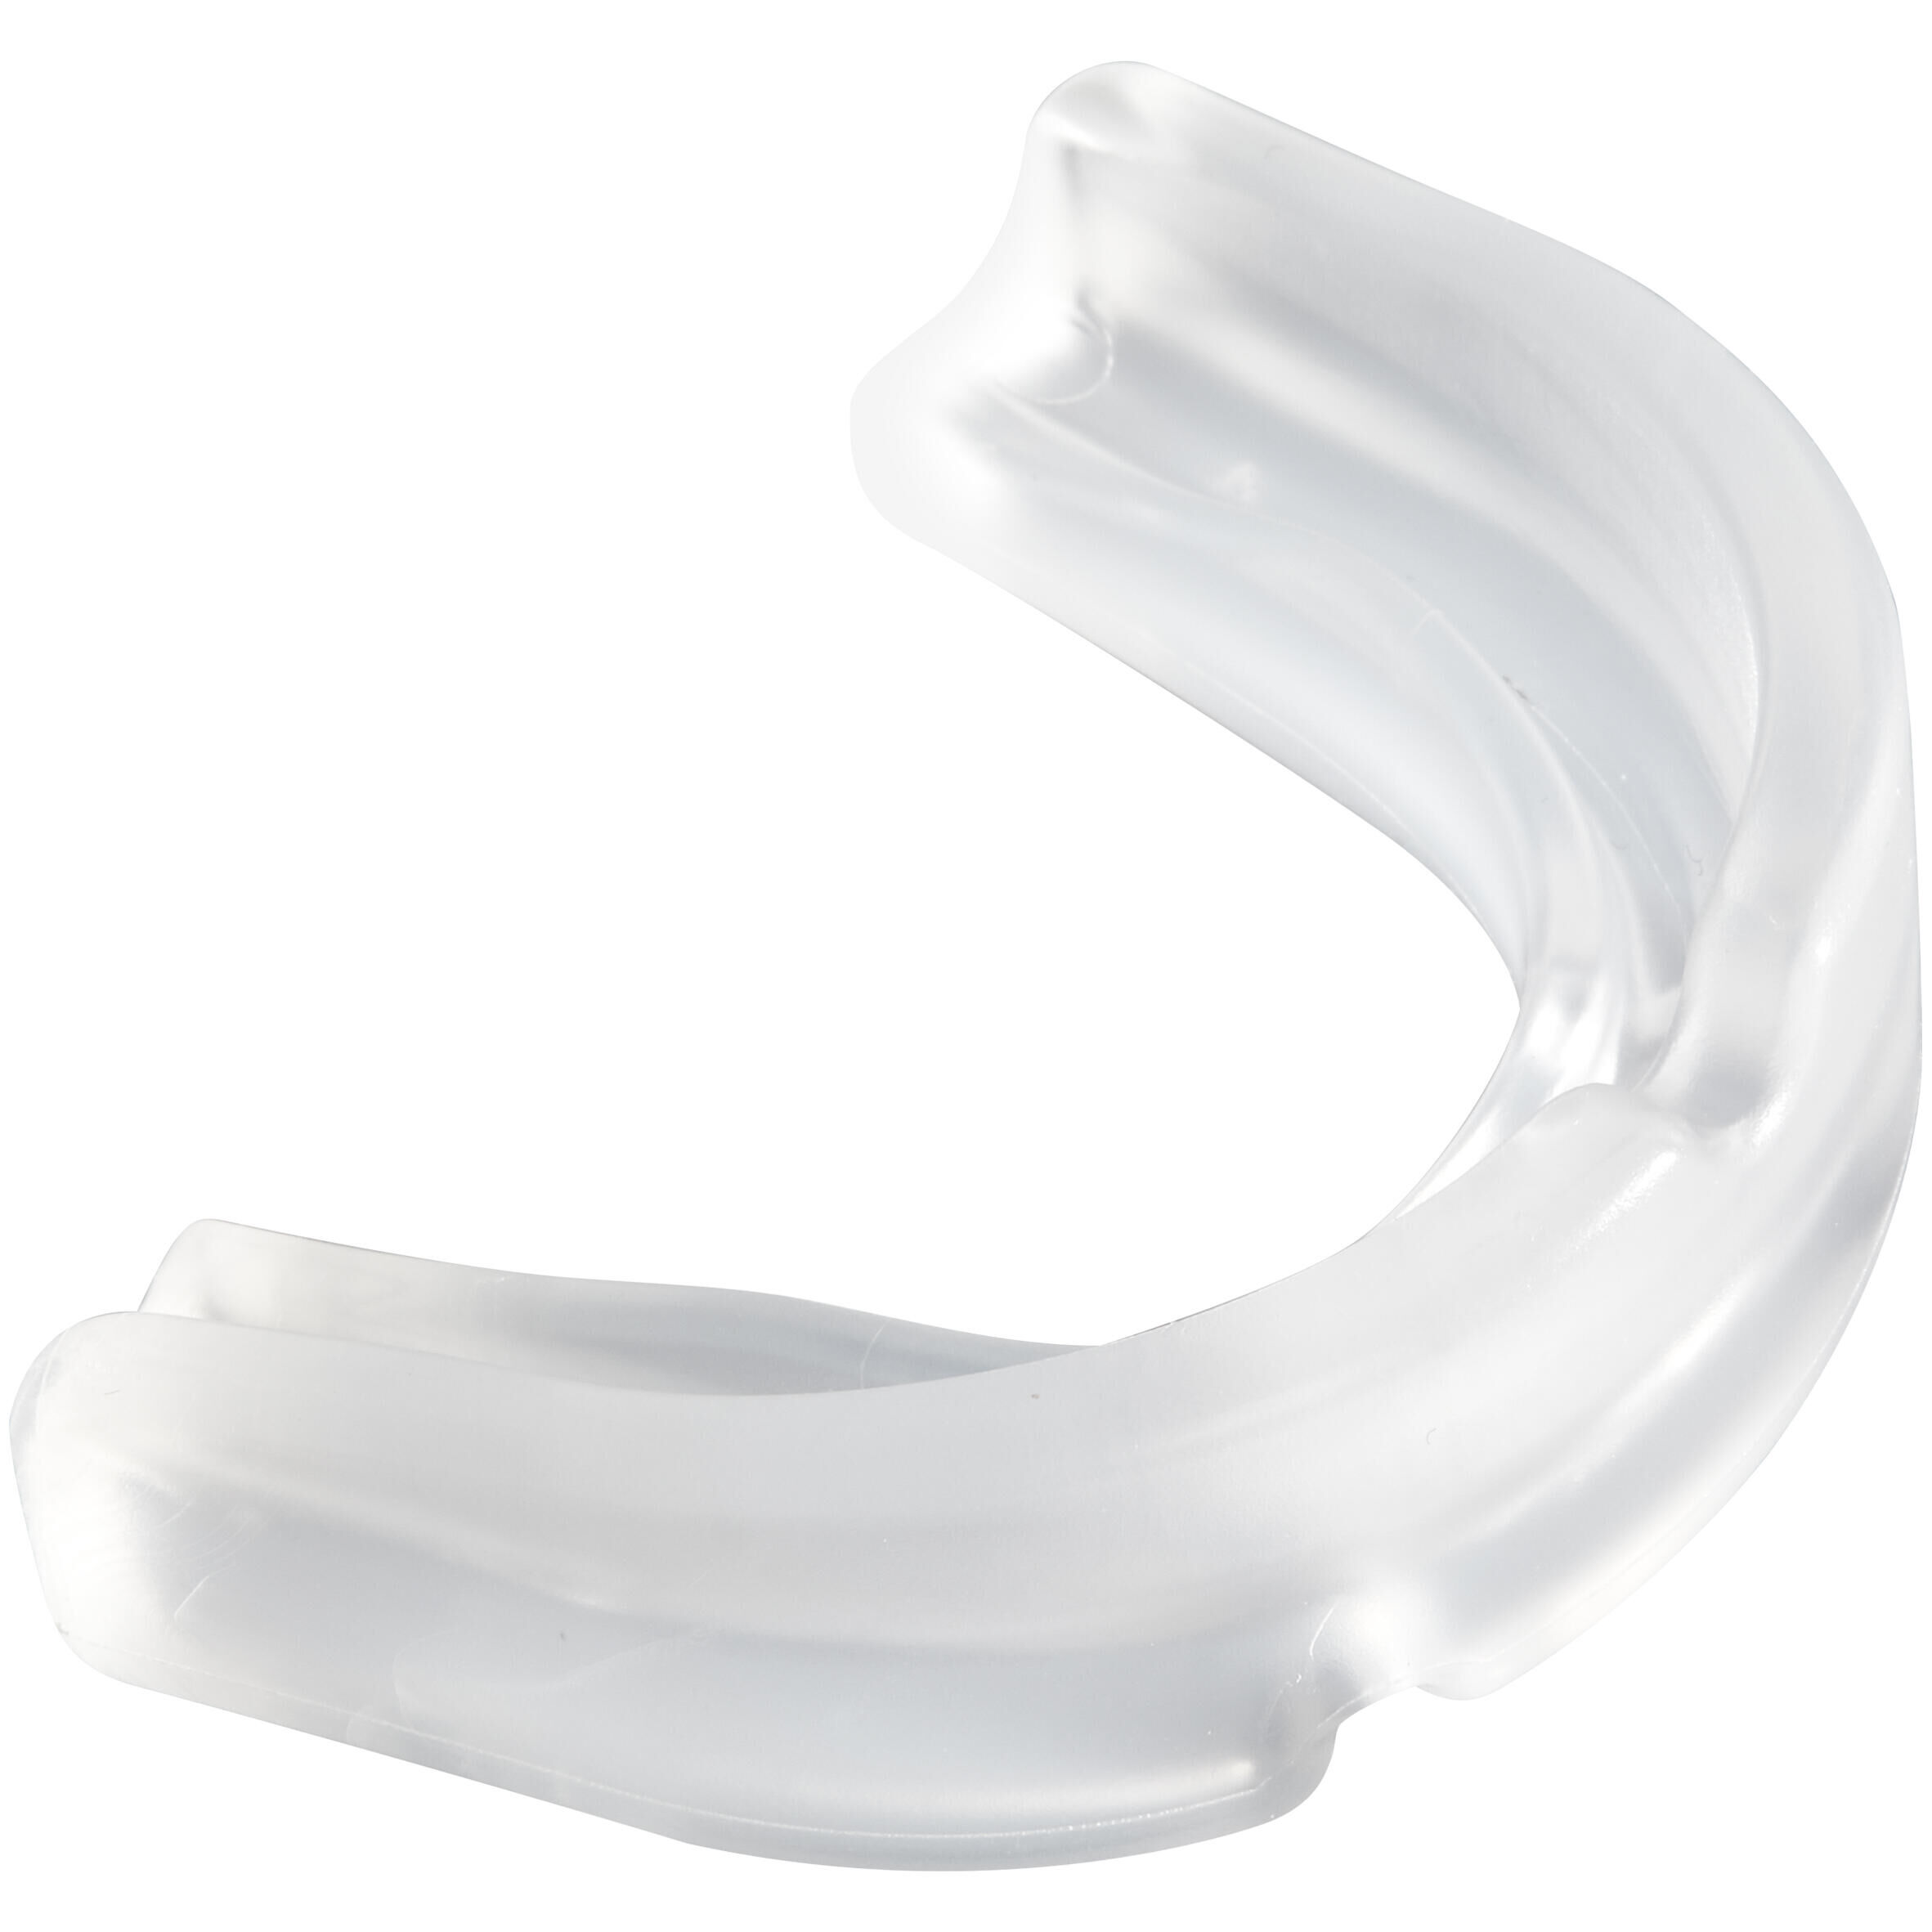 KOROK Adult Large Low-Intensity Field Hockey Mouthguard FH100 - Transparent